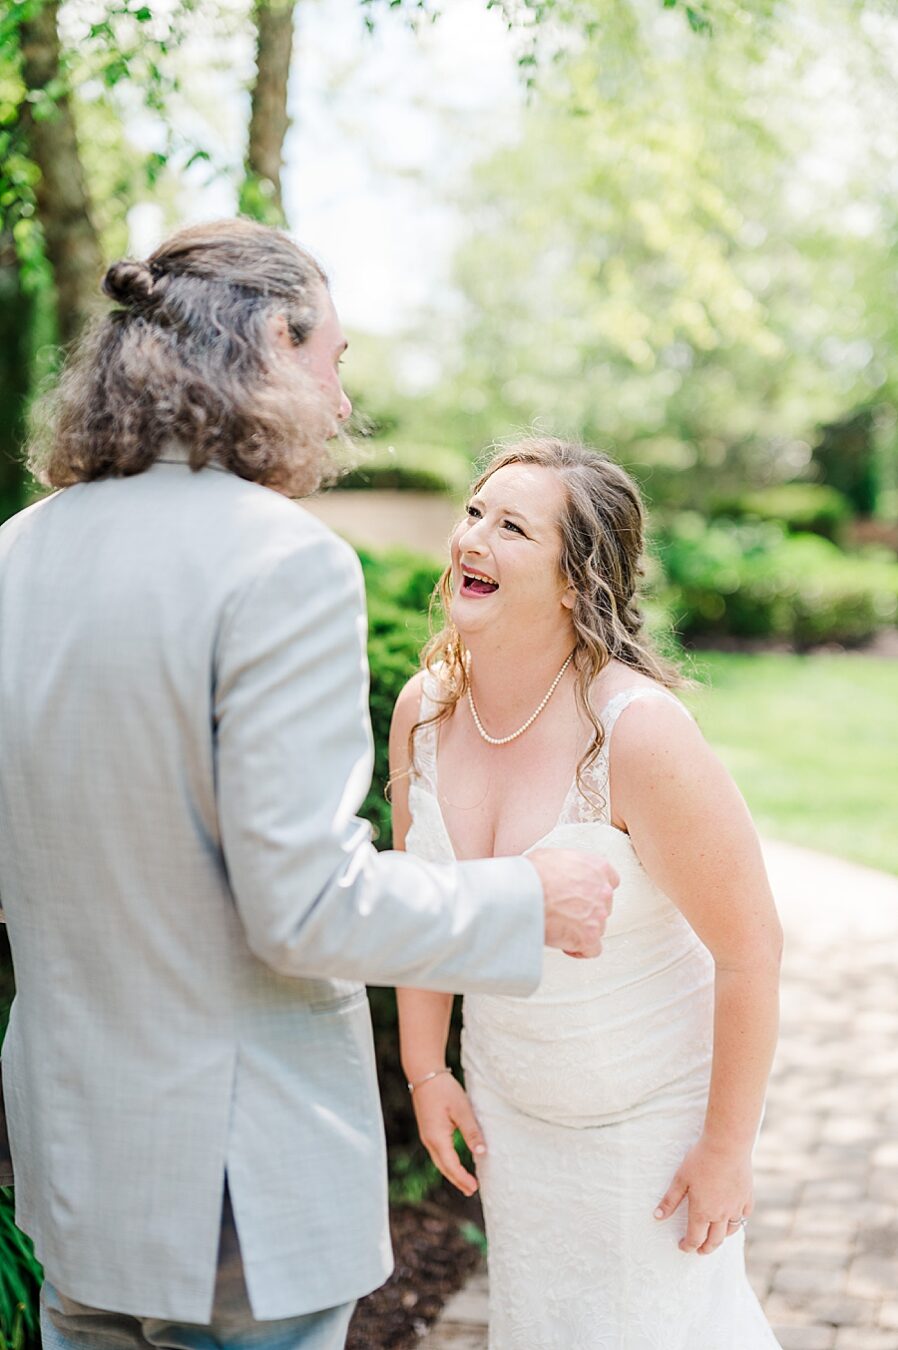 Smiling during Castleton Farms Wedding with a Rainbow by Amanda May Photos